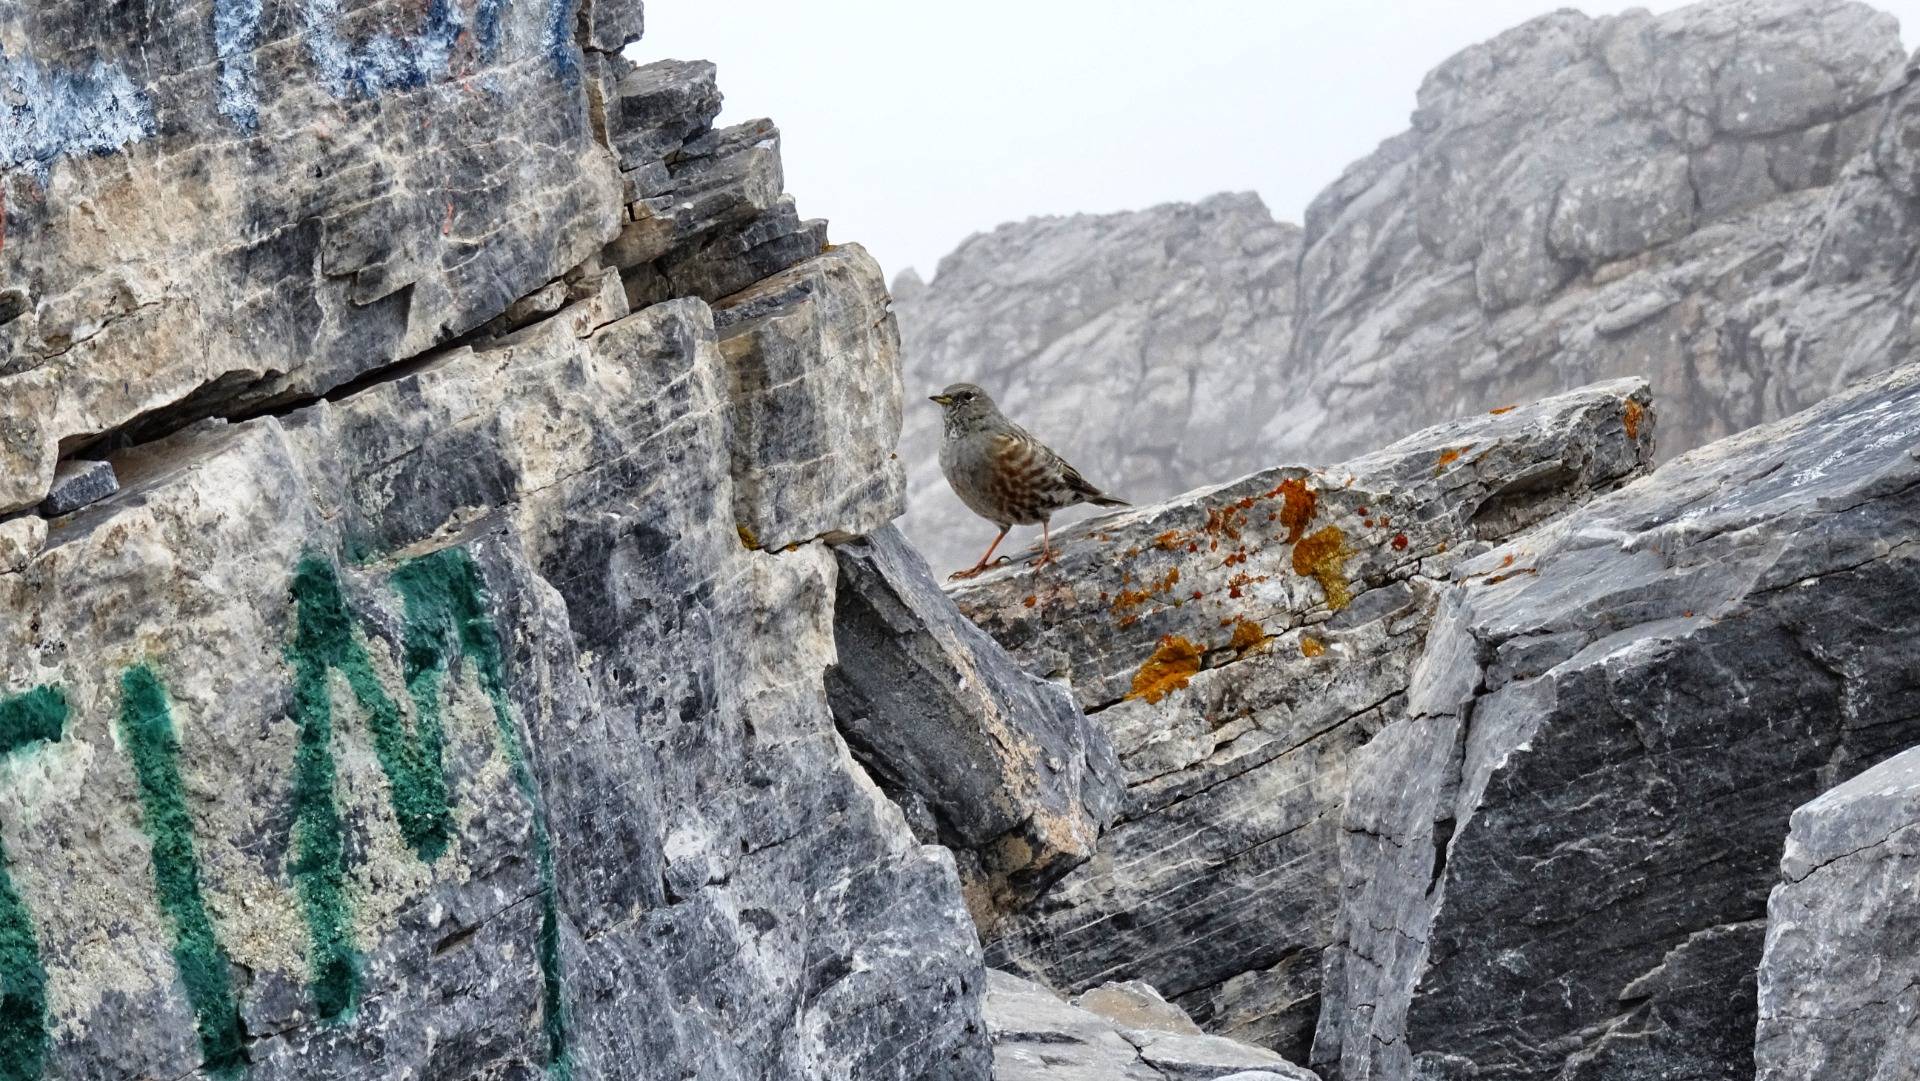 This birds have a rest 2.900 meters high